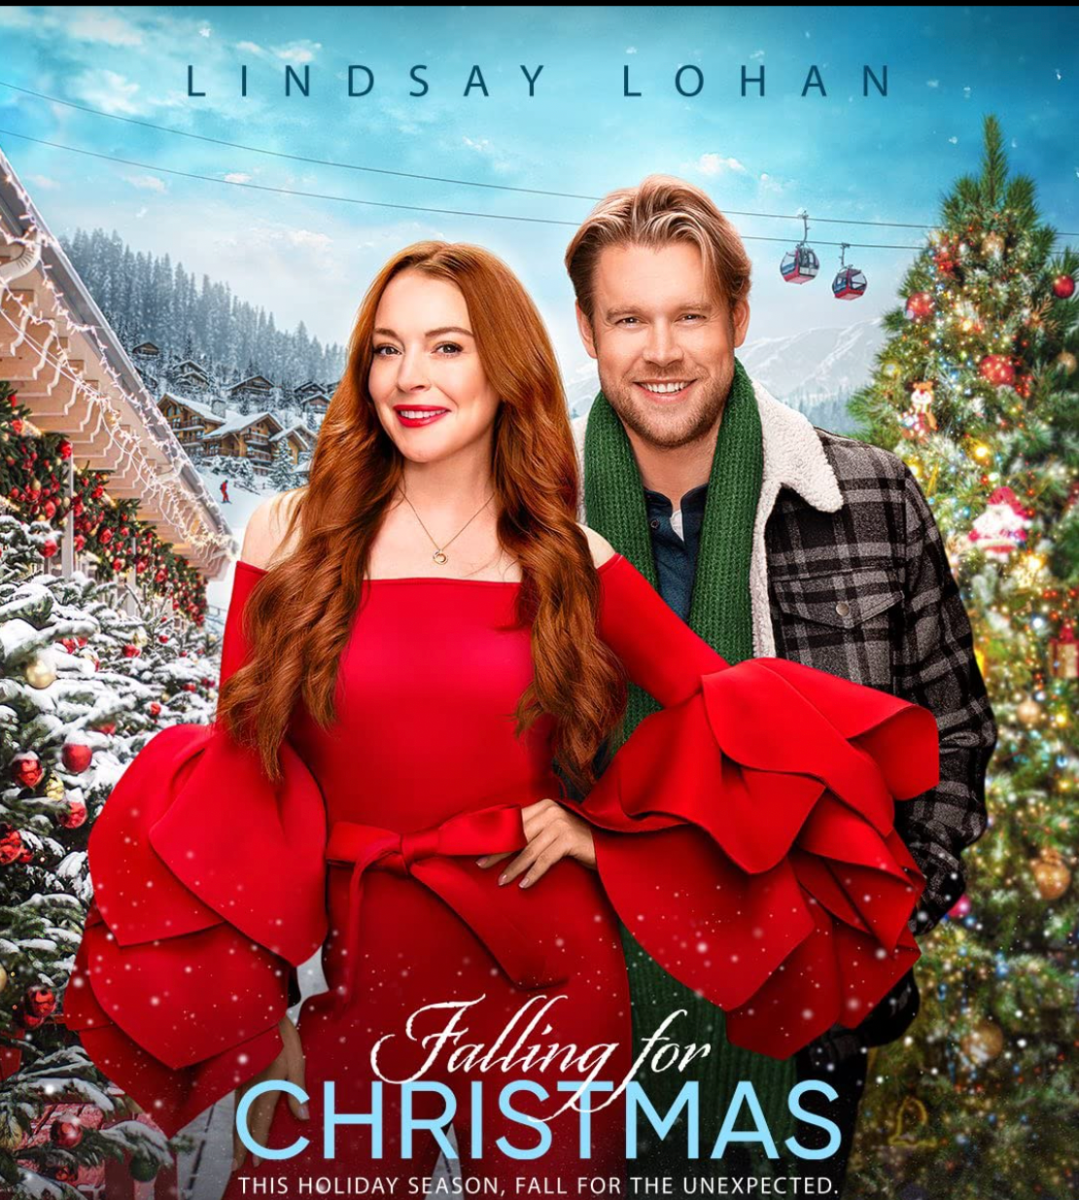 Promo image for movie Sierra is wearing a designer red outfit with large sleeves. Jake is in plaid. They are in front of Christmas trees and ski lodges. Lindsay Lohan has top billing. The title is below them and the tagline THIS HOLIDAY SEASON FALL FOR THE UNEXPECTED.